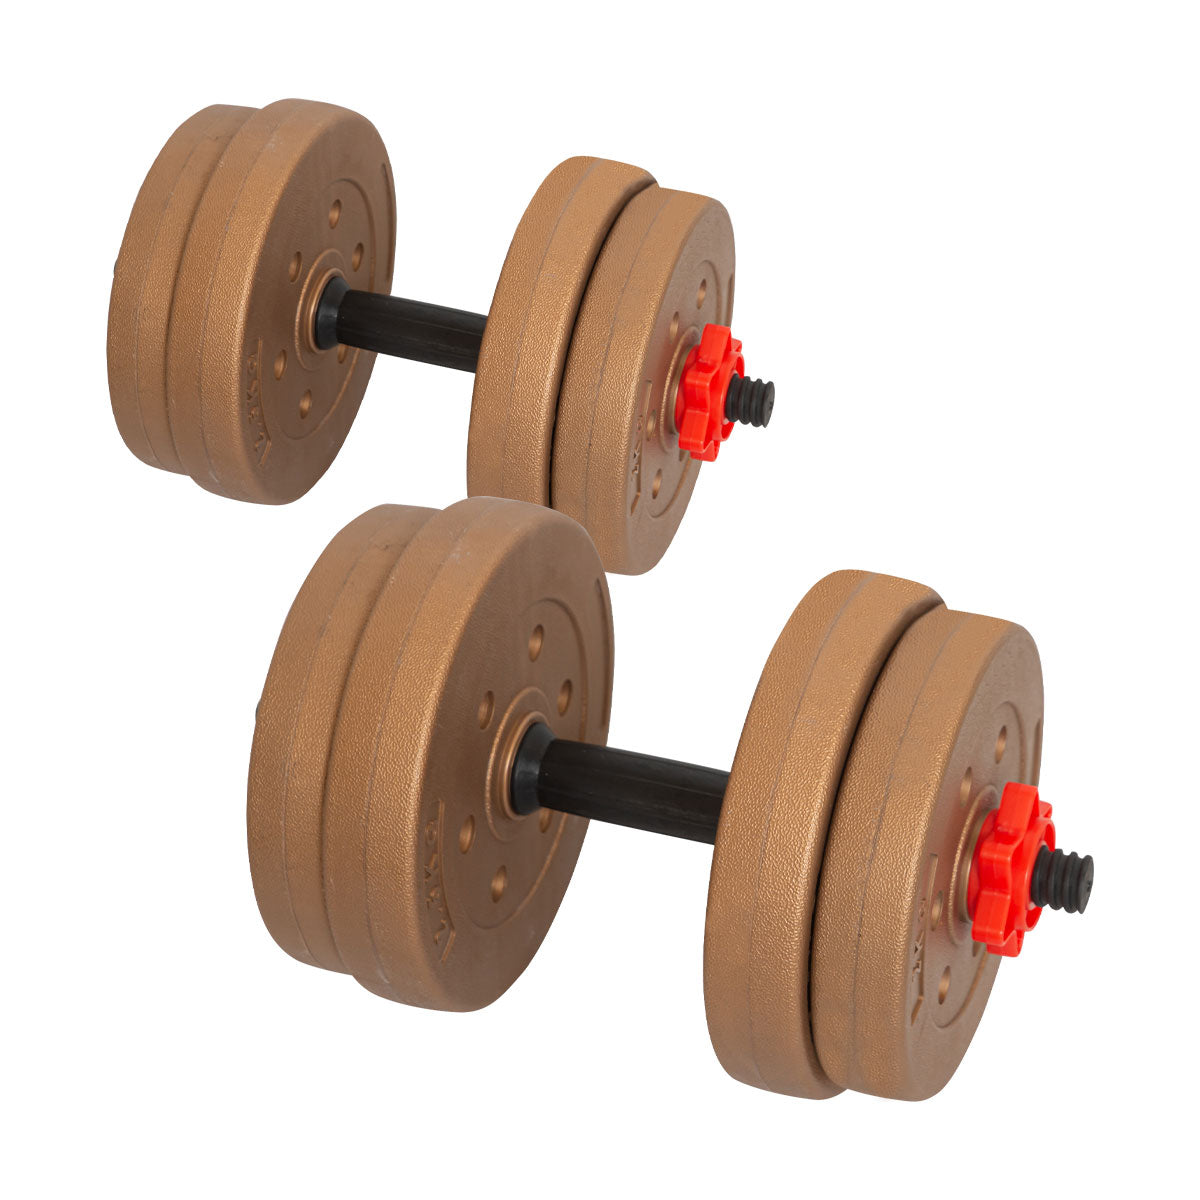 Powertrain 20kg Home Gym Adjustable Dumbbell and Barbell Weights Set - Gold